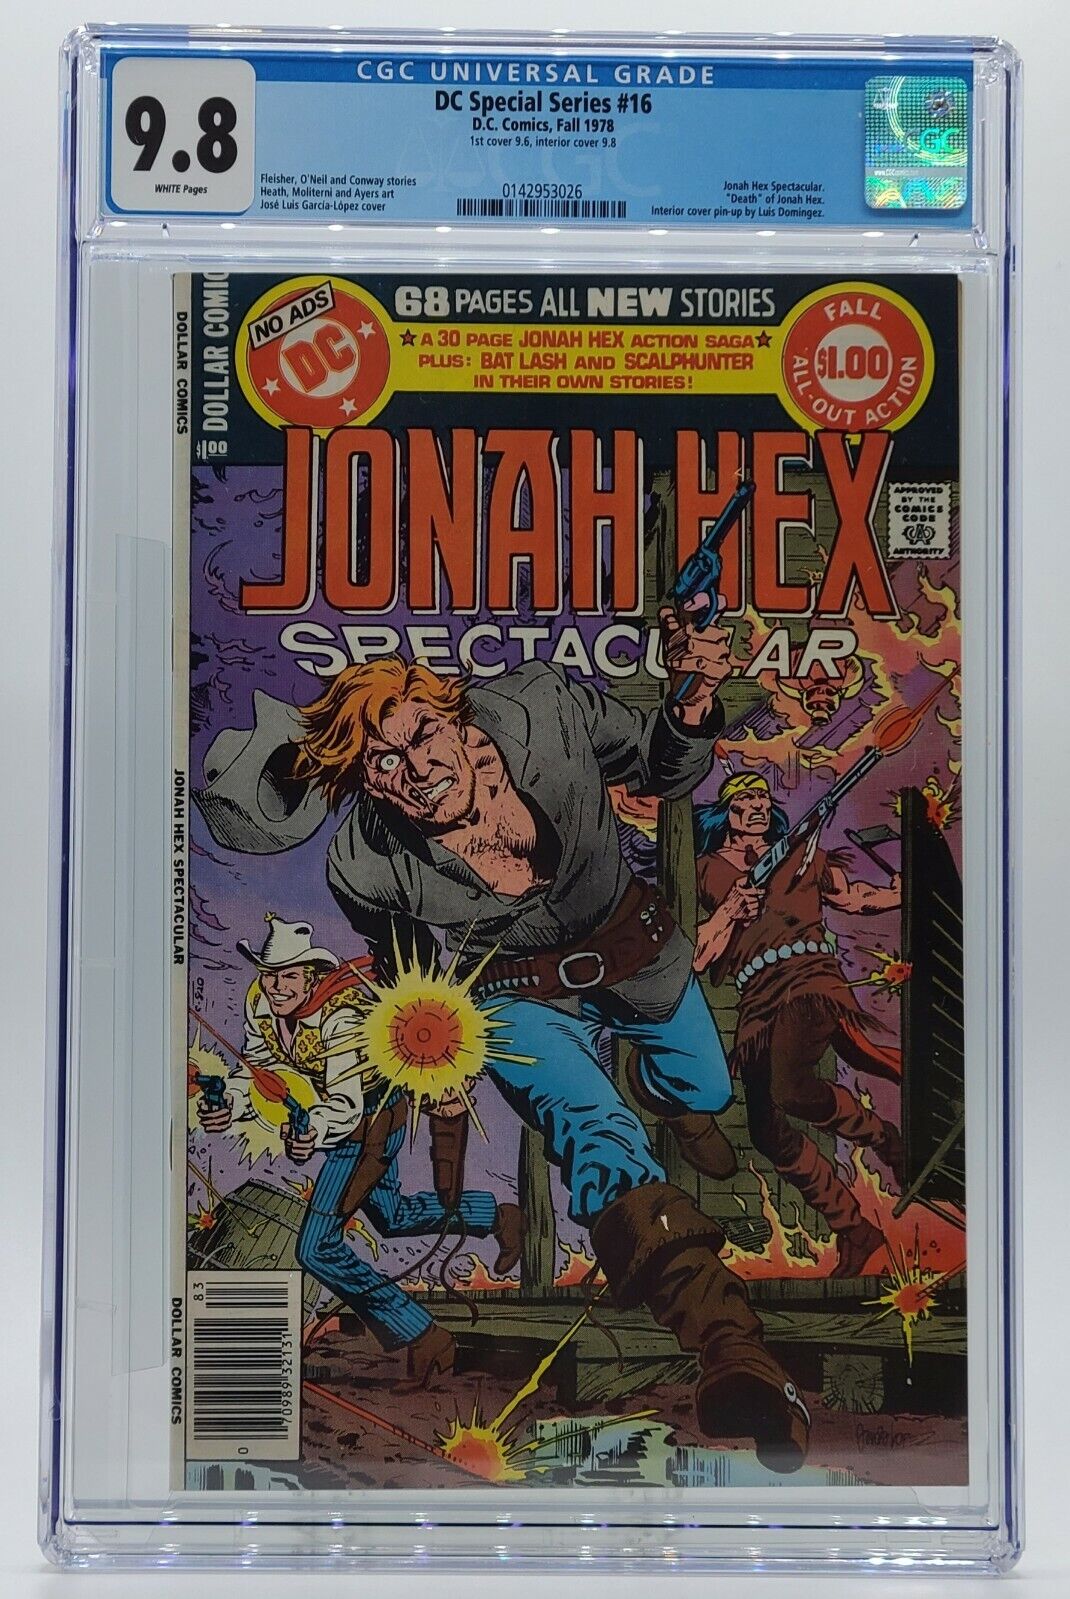 DC SPECIAL SERIES JONAH HEX SPECTACULAR #16 CGC 9.8 *DOUBLE COVER* ONE OF A KIND